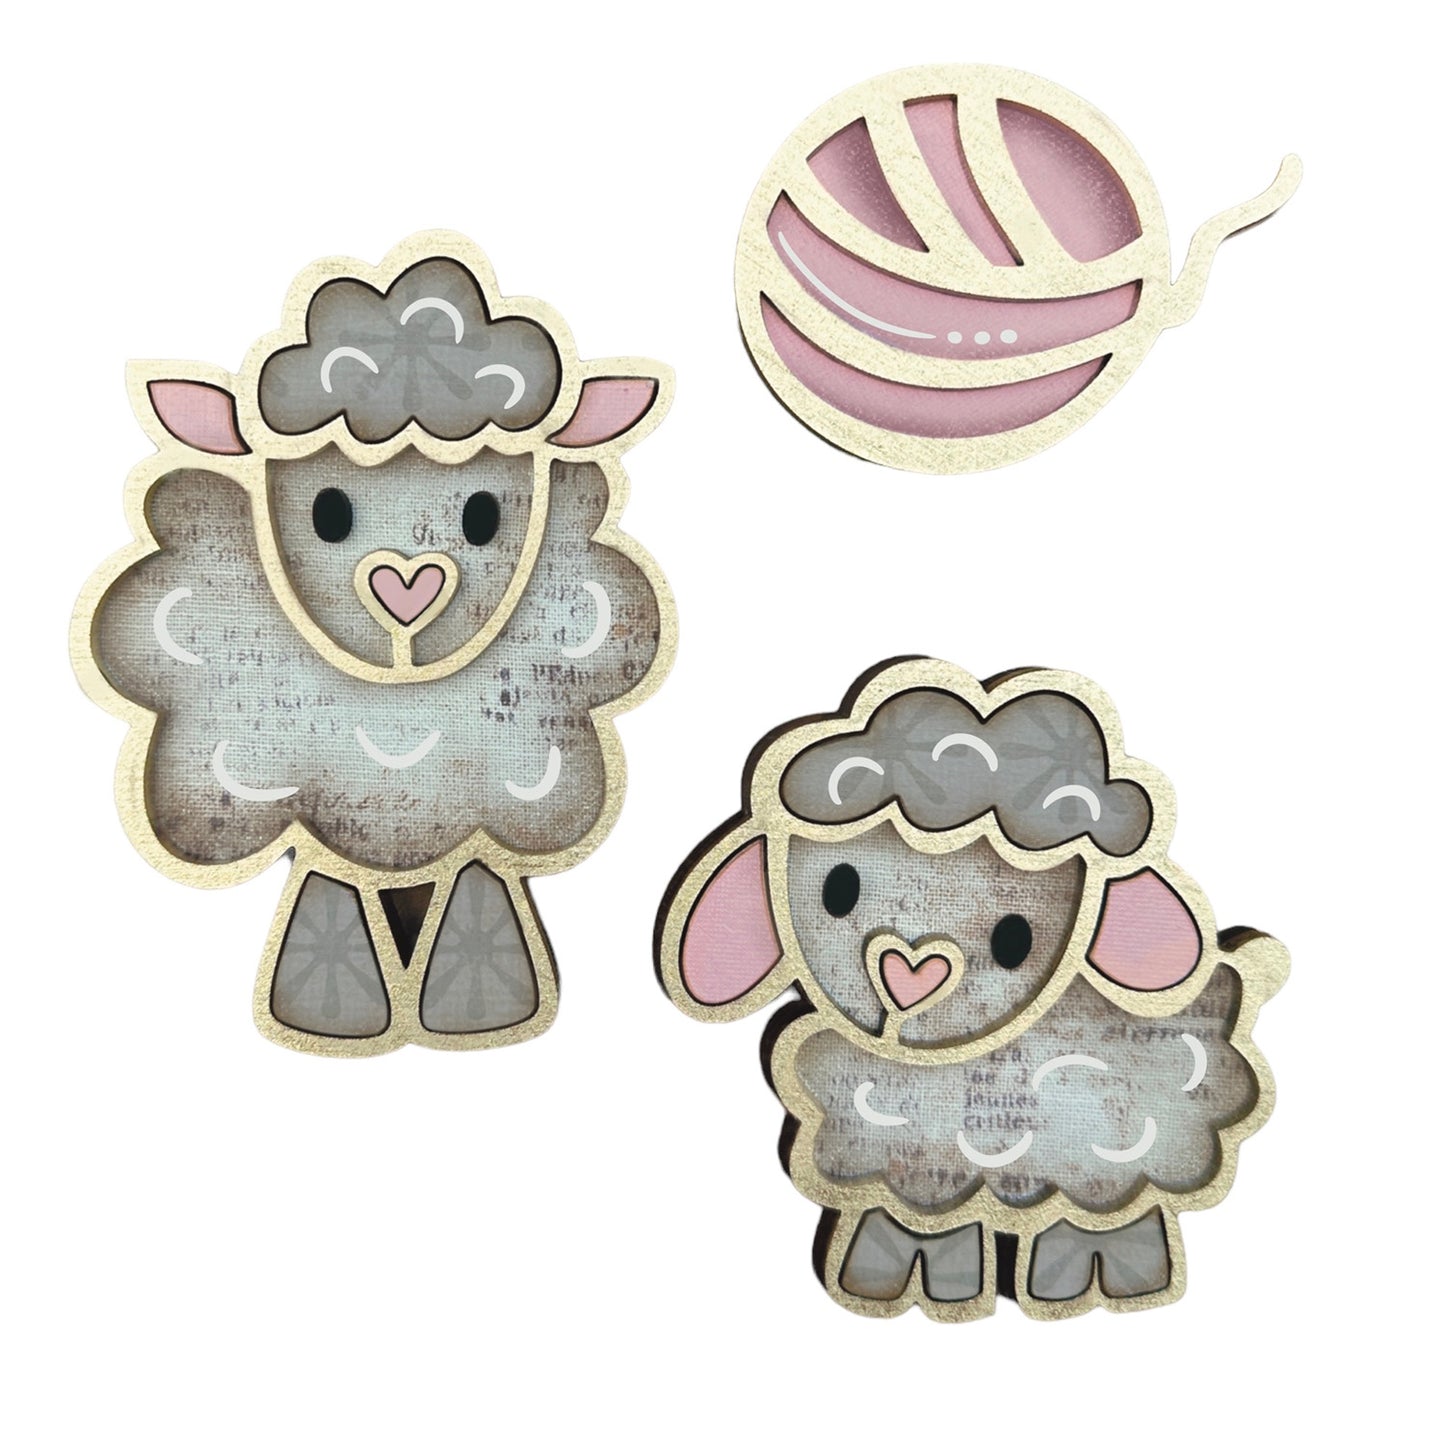 Whimsical Sheep-Themed Magnet Collection